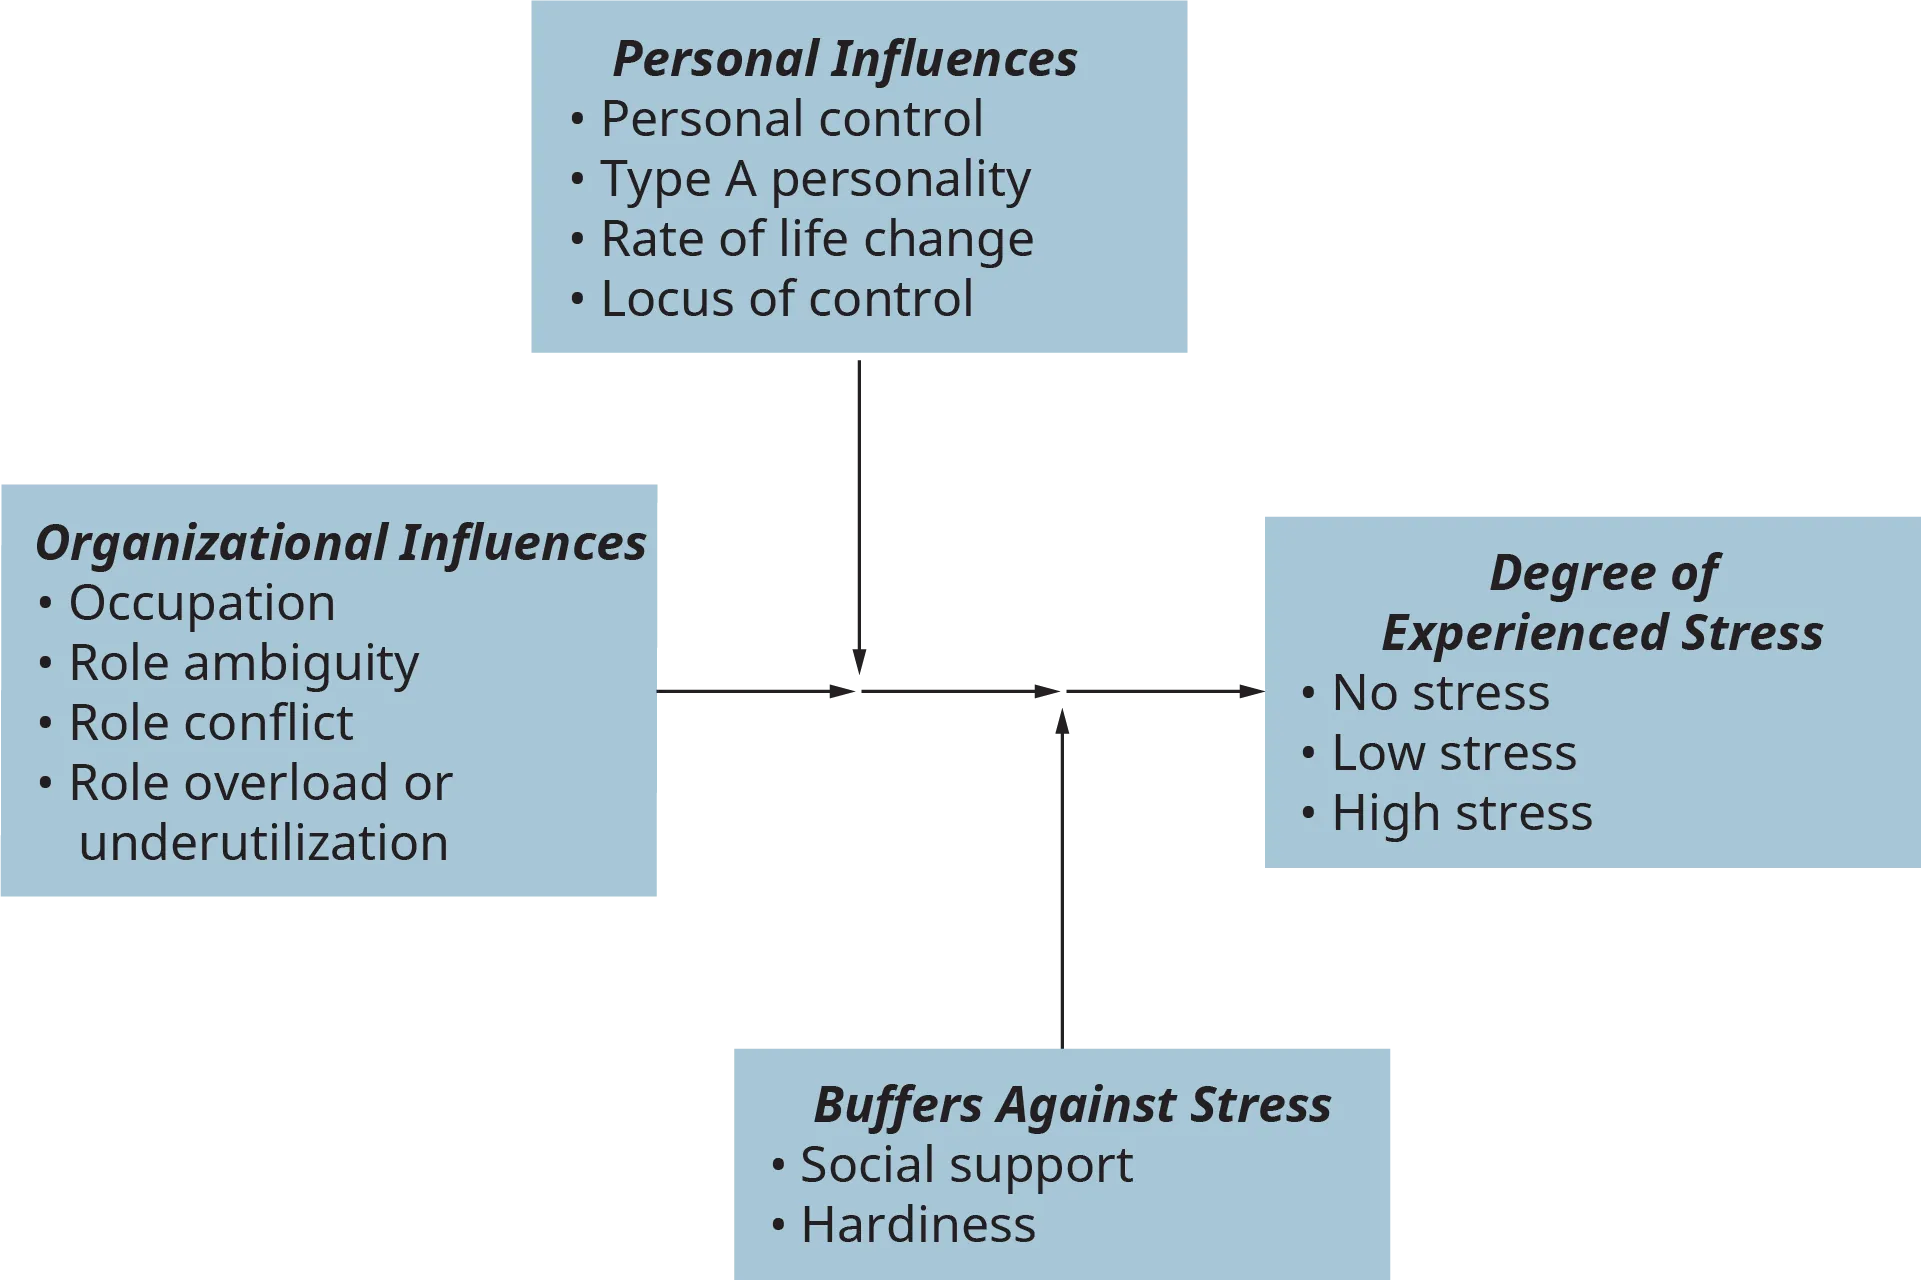 An illustration depicts the major influences on job-related stress, buffering effects on work-related stress, and the degree of experienced stress.